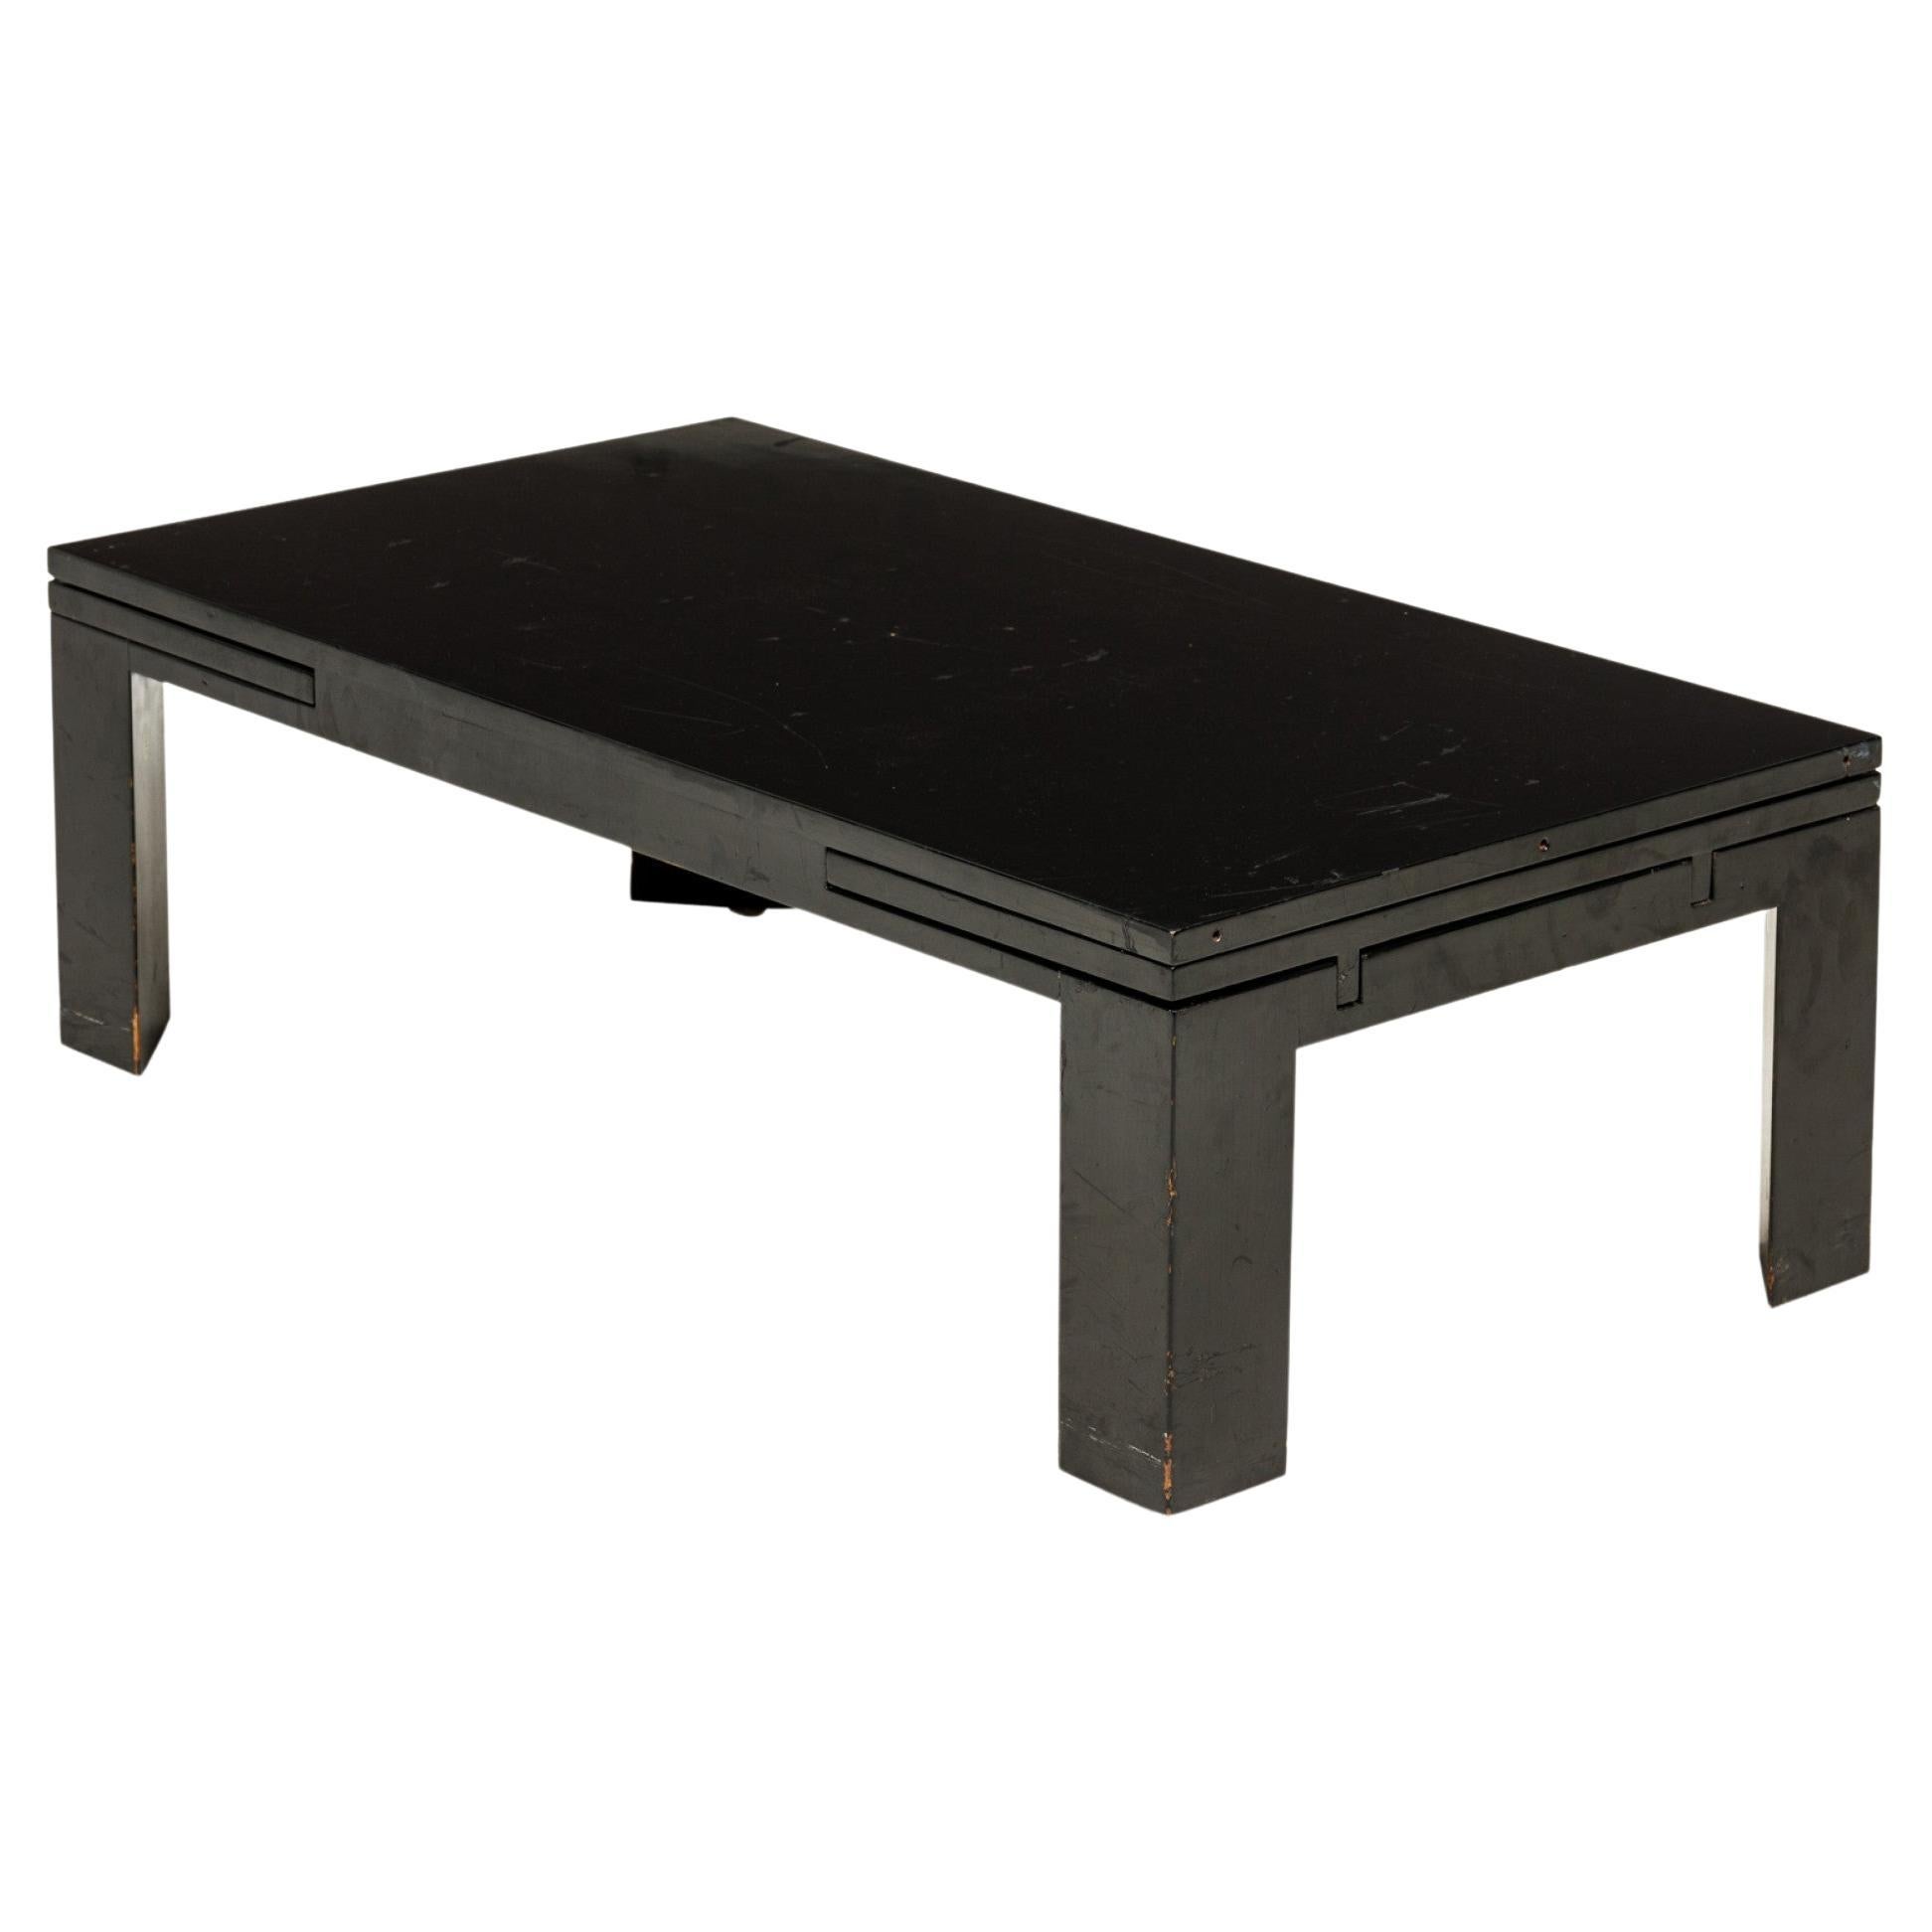 Edward Wormley for Dunbar Black Painted Refectory Coffee / Cocktail Table